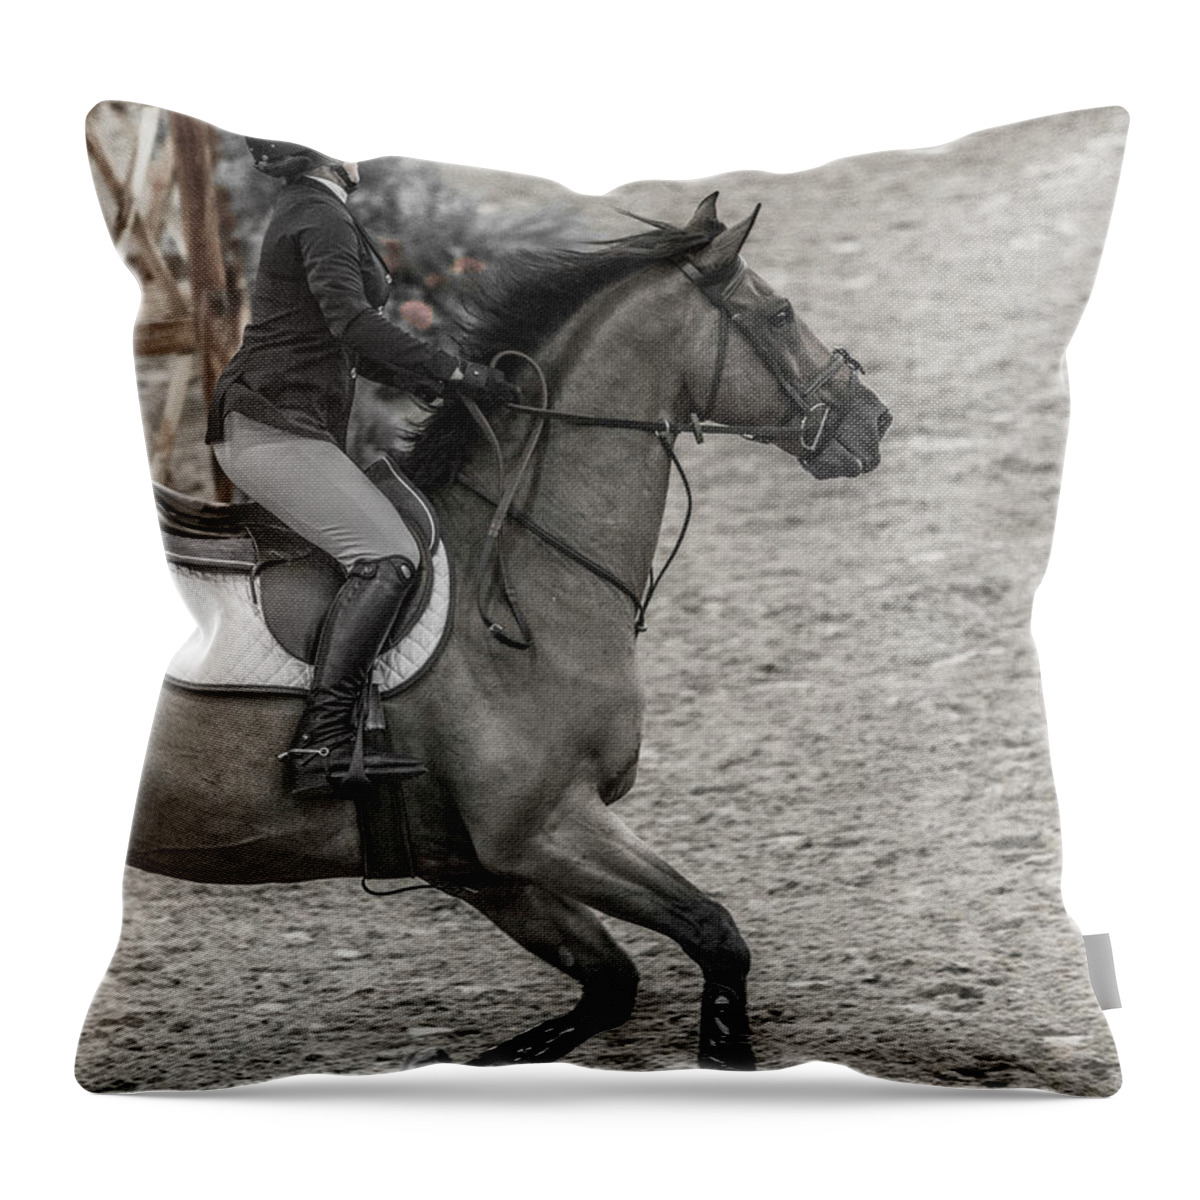 Horse Throw Pillow featuring the photograph Show Jumping Teamwork by Betsy Knapp